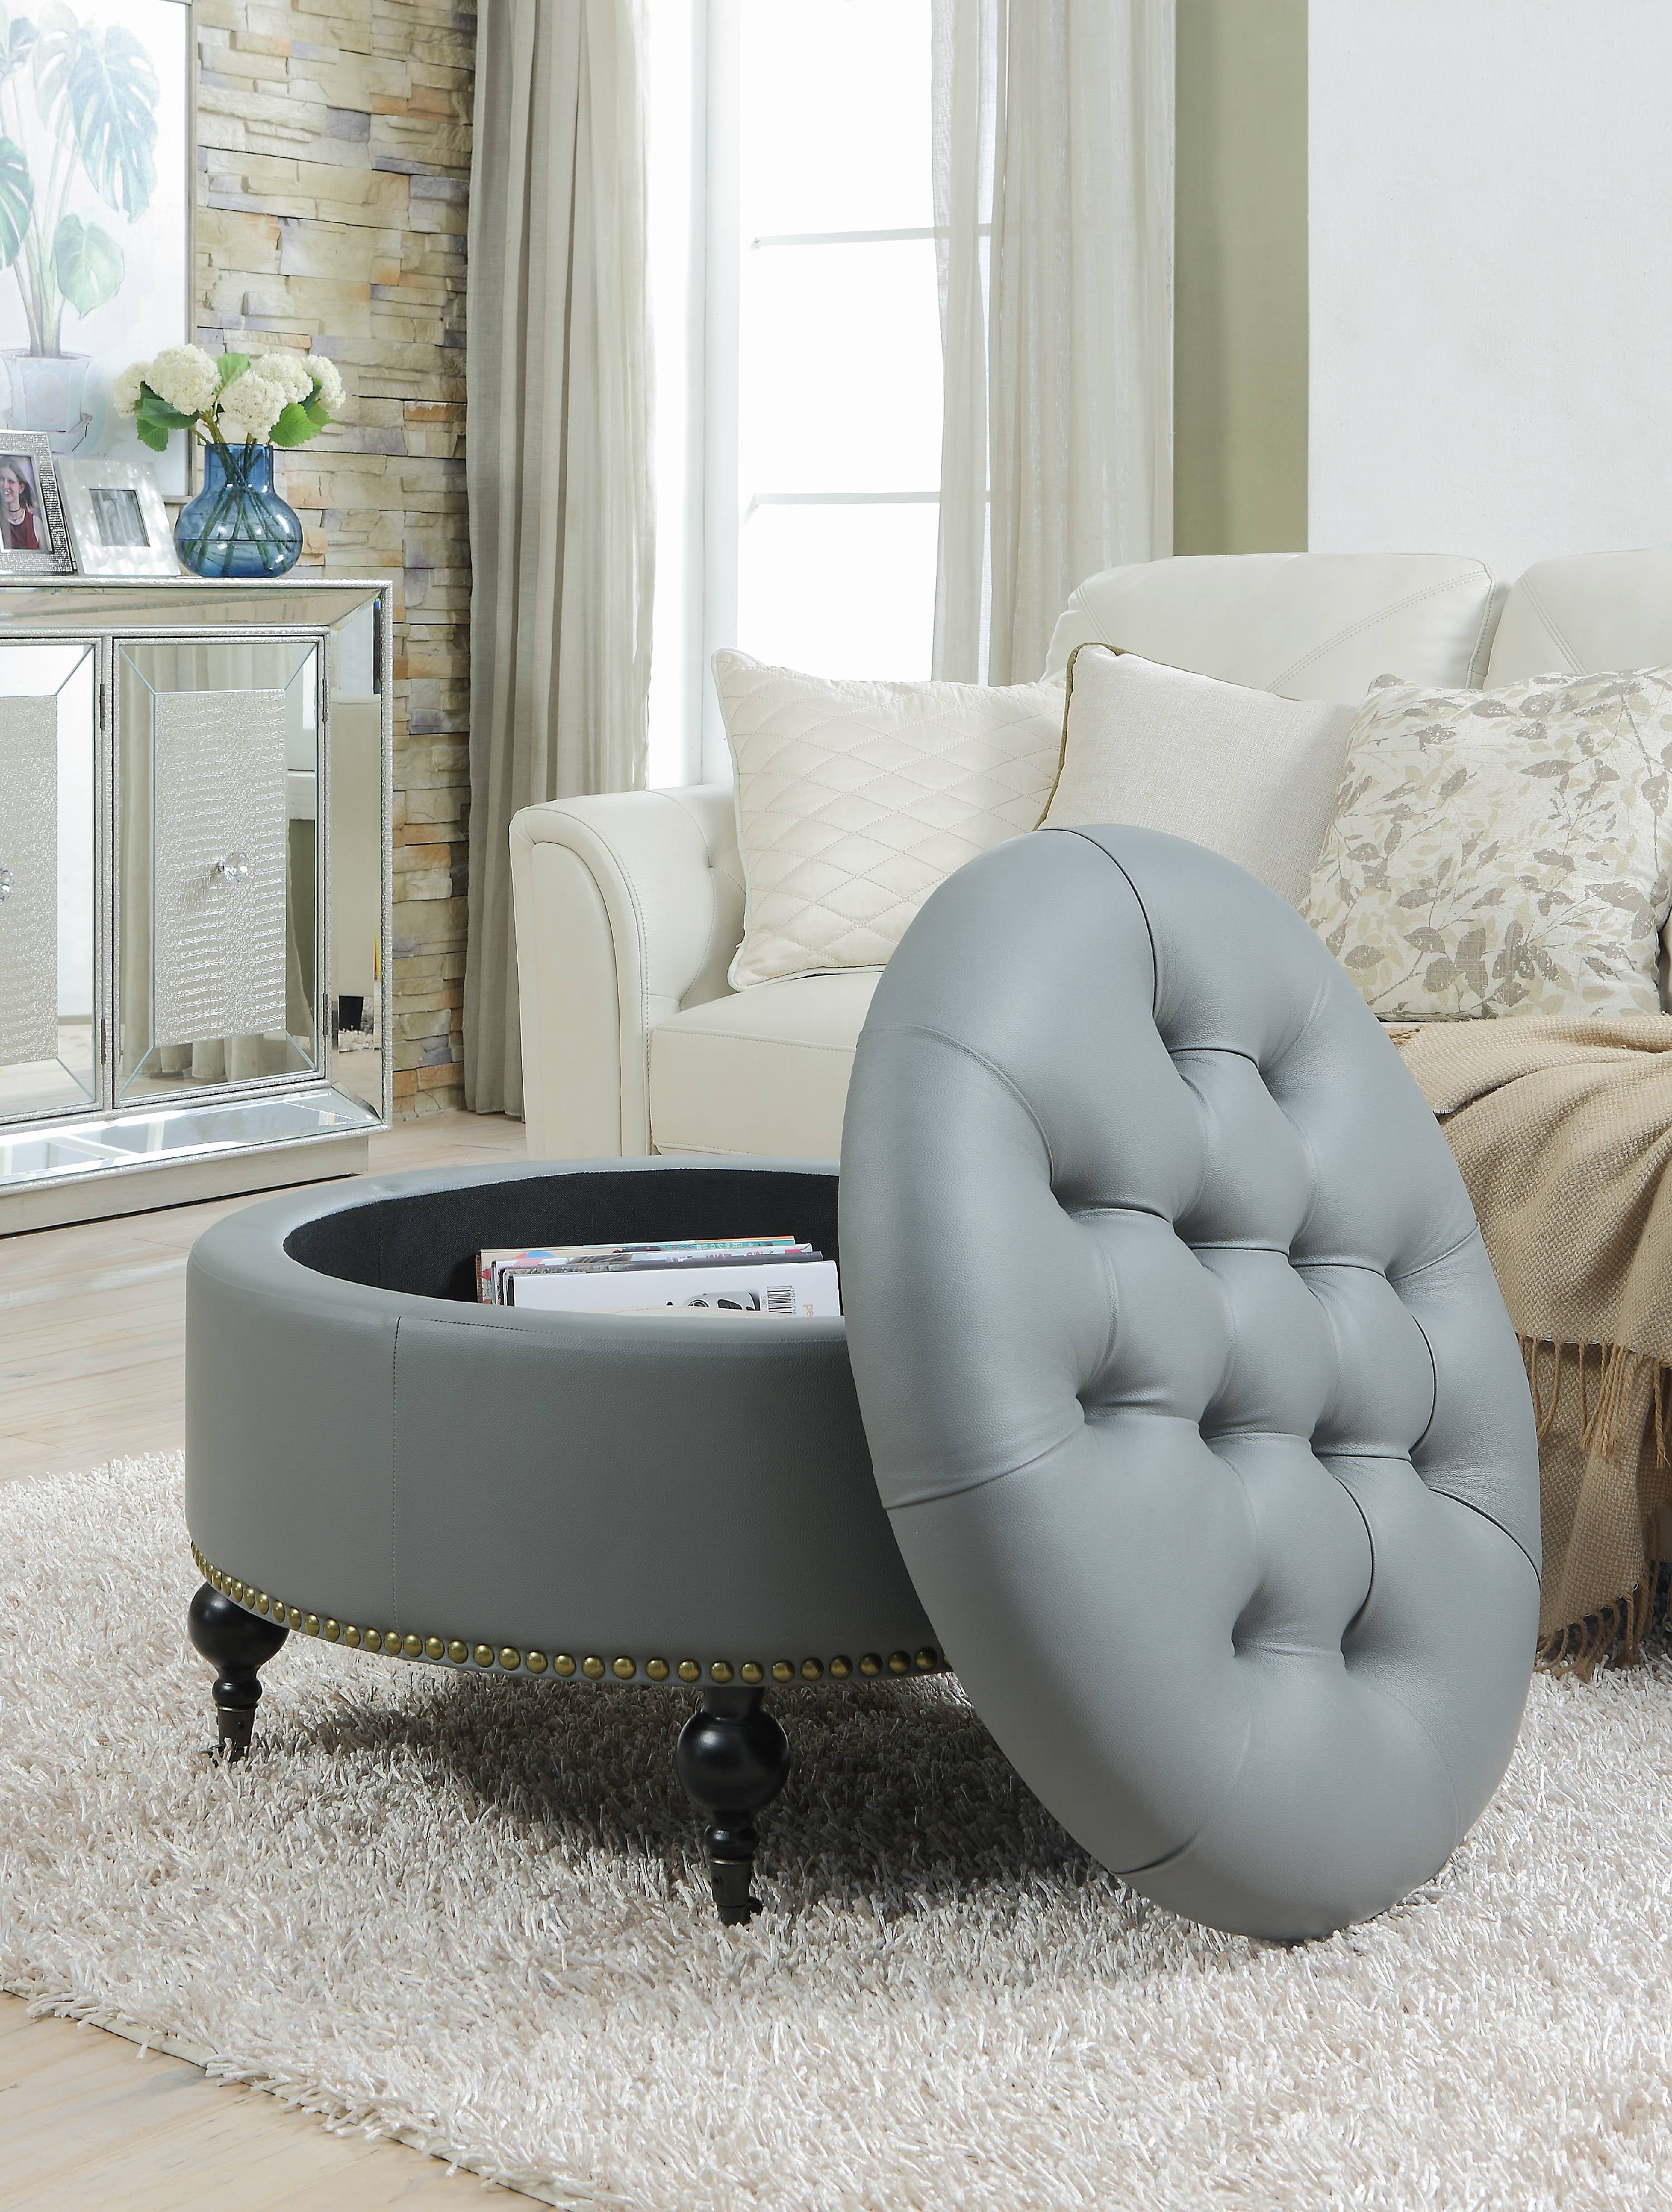 Design Guild Ottoman Beautiful Round Footrest W Soft, Faux Leather Cover,  Thick Padded Cushion, Decorative Gold Base With Storage, Blue＿並行輸入 クッションカバー 